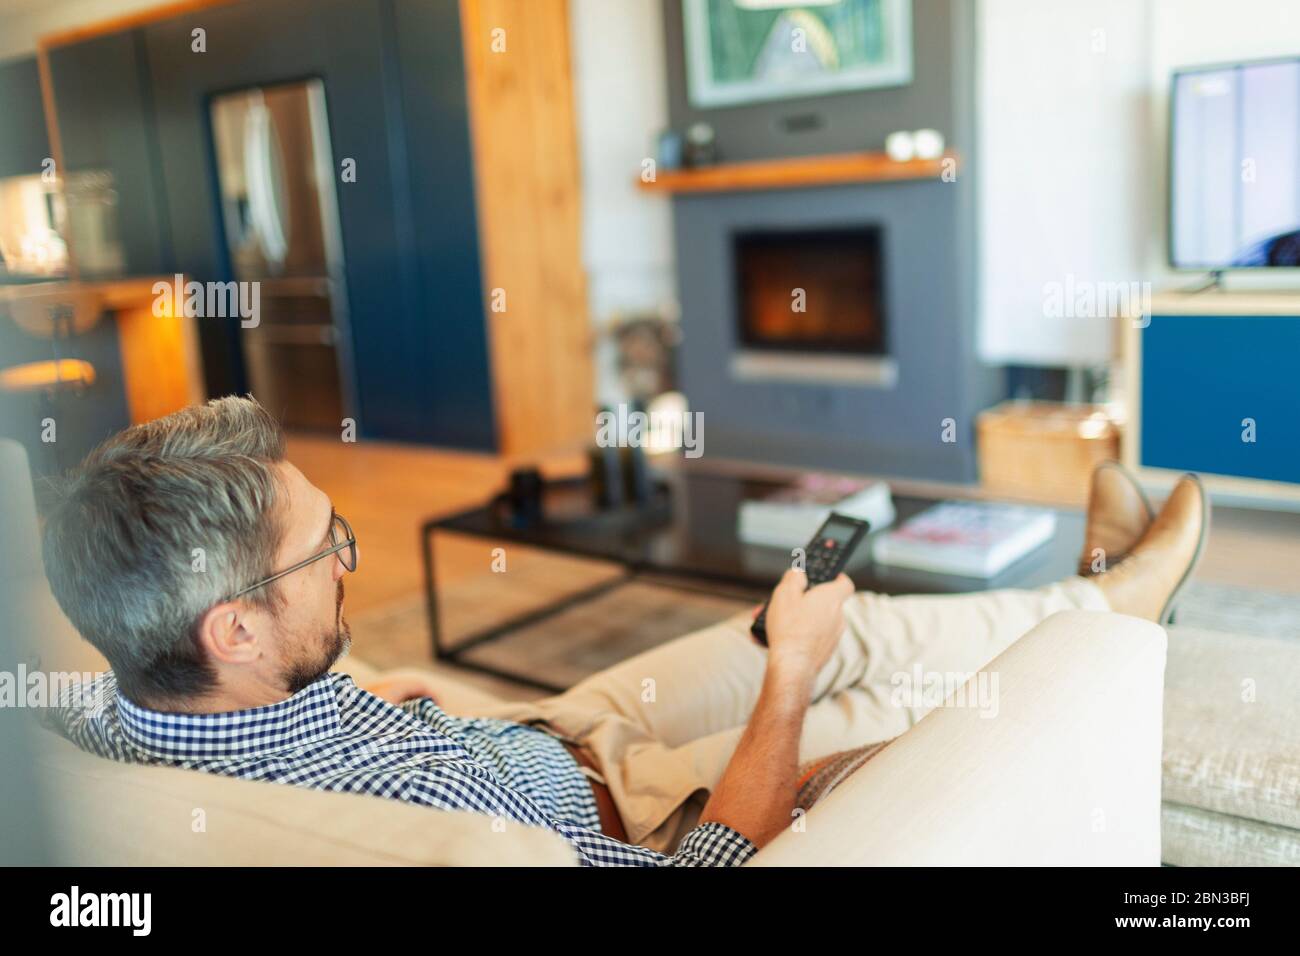 Man relaxing, watching TV in living room Stock Photo